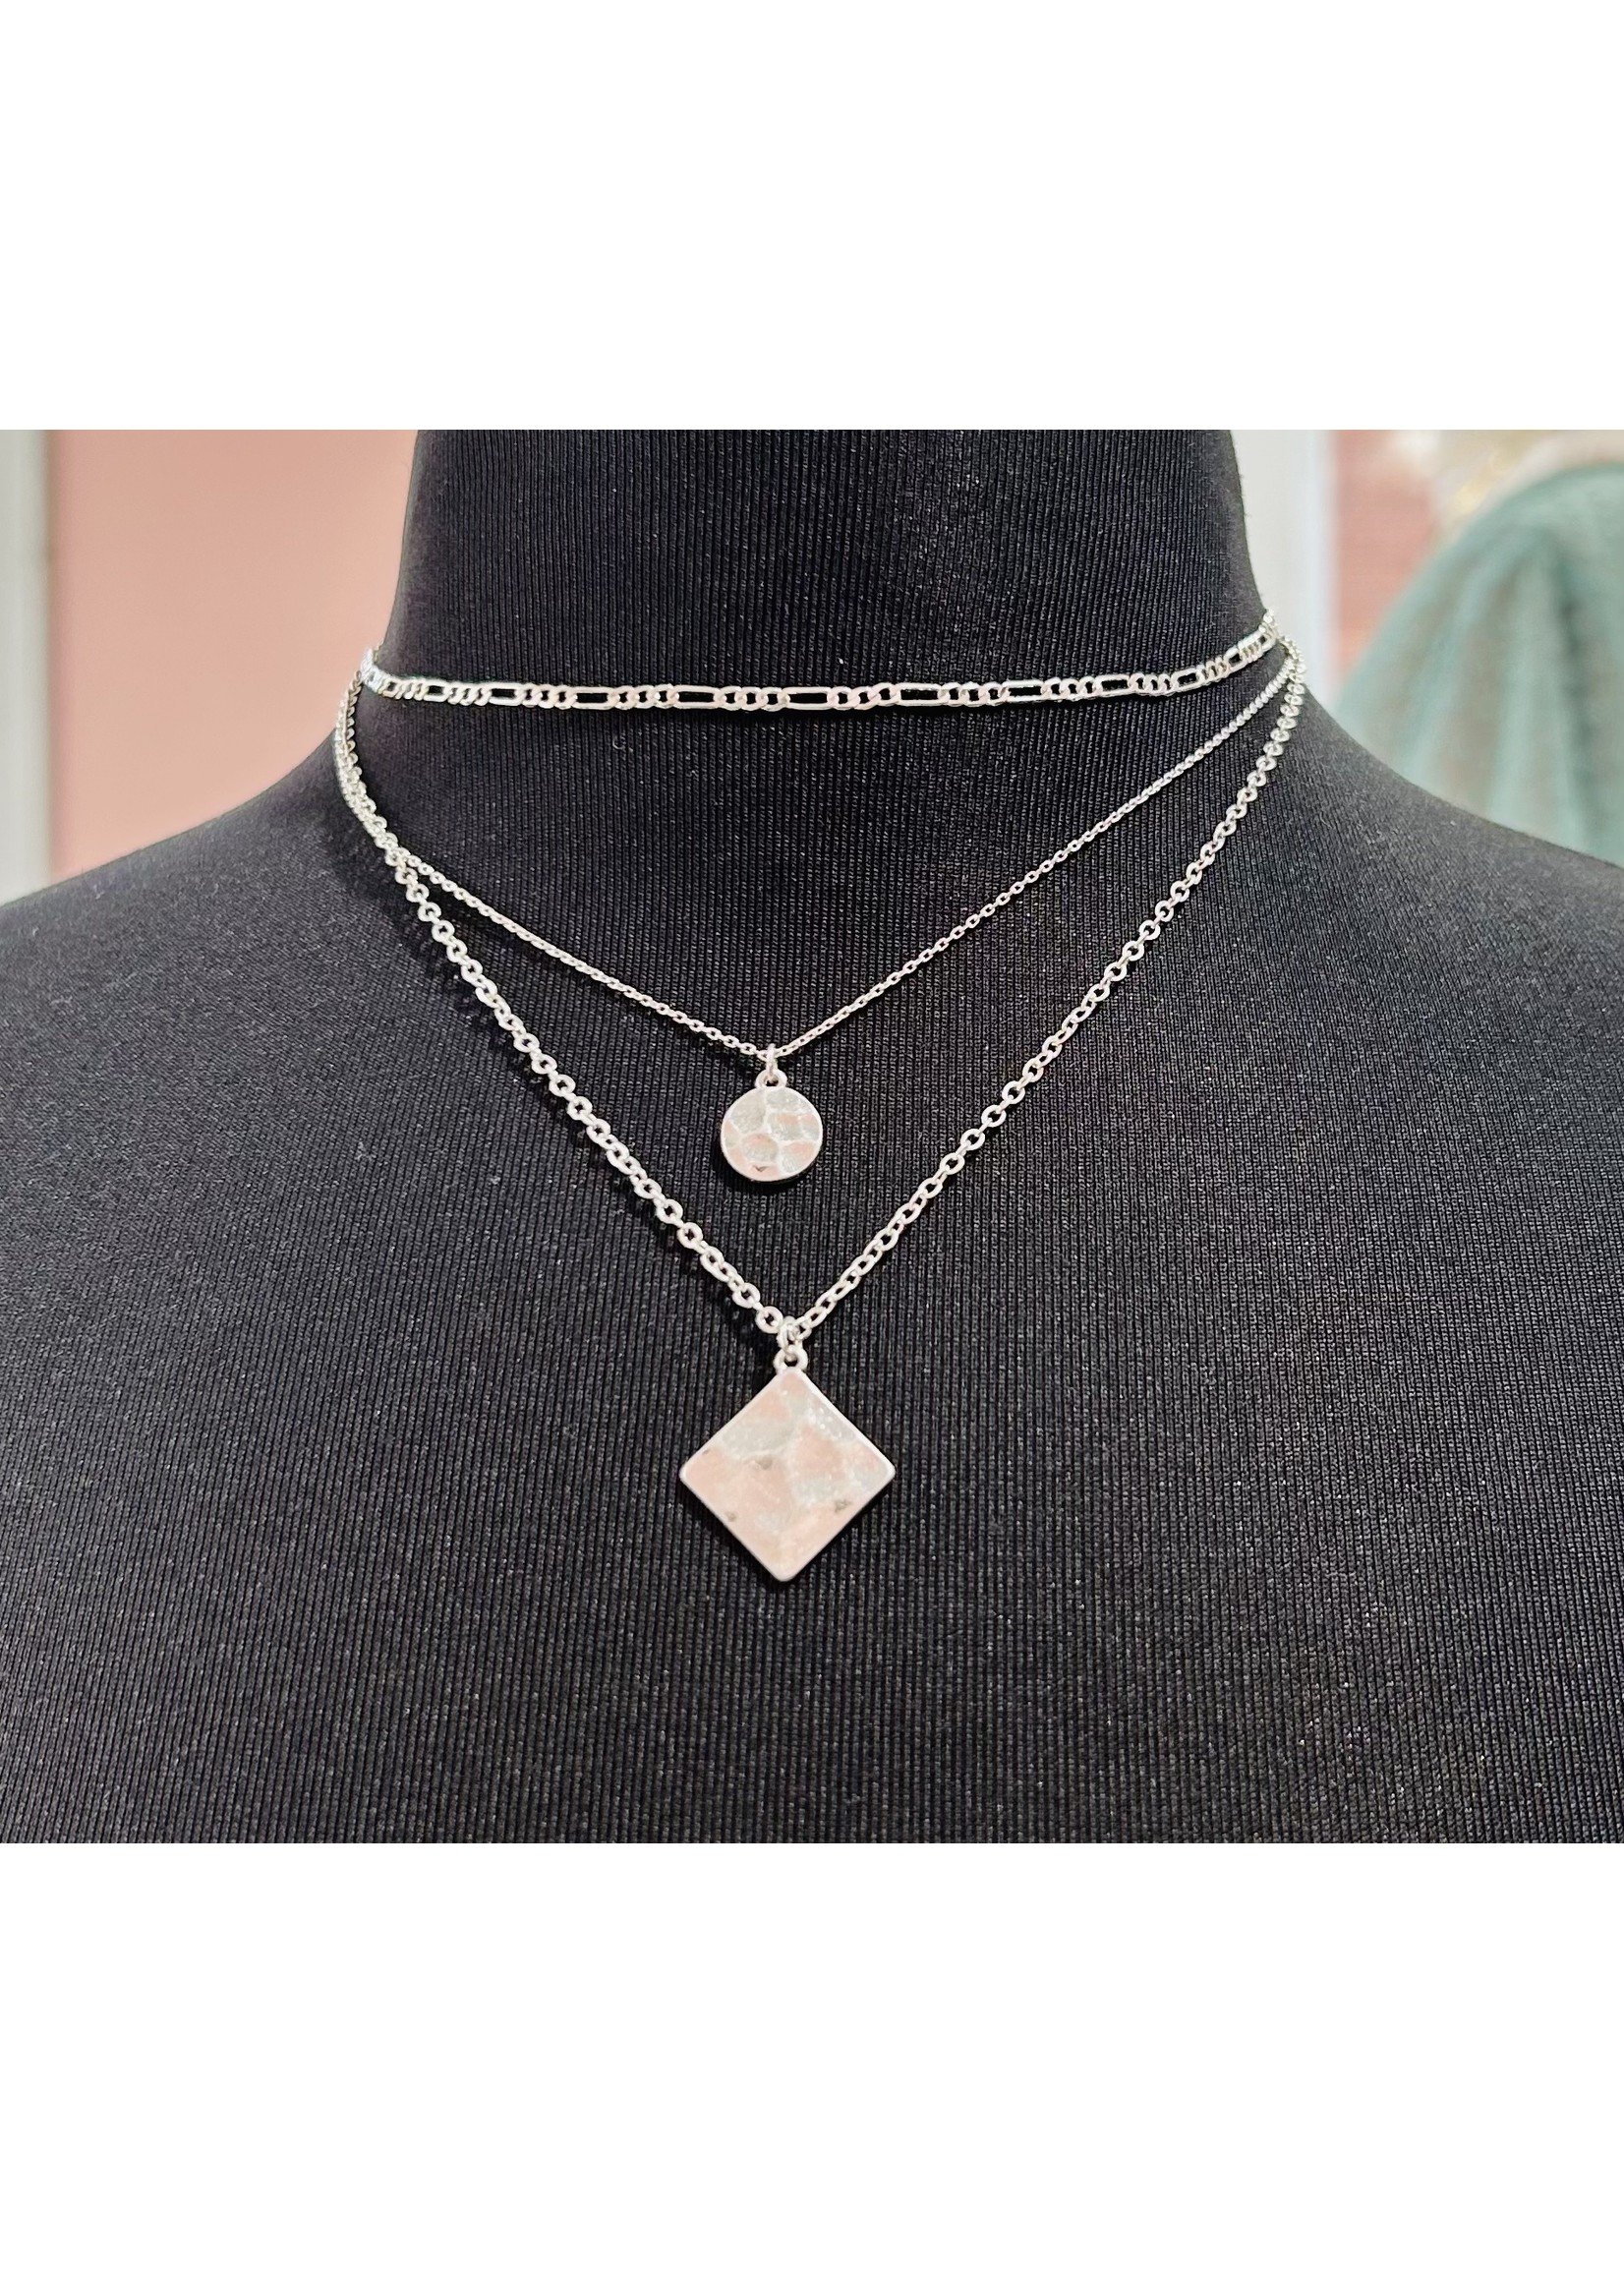 Southern Seoul Silver 2 Charm Layered Necklace